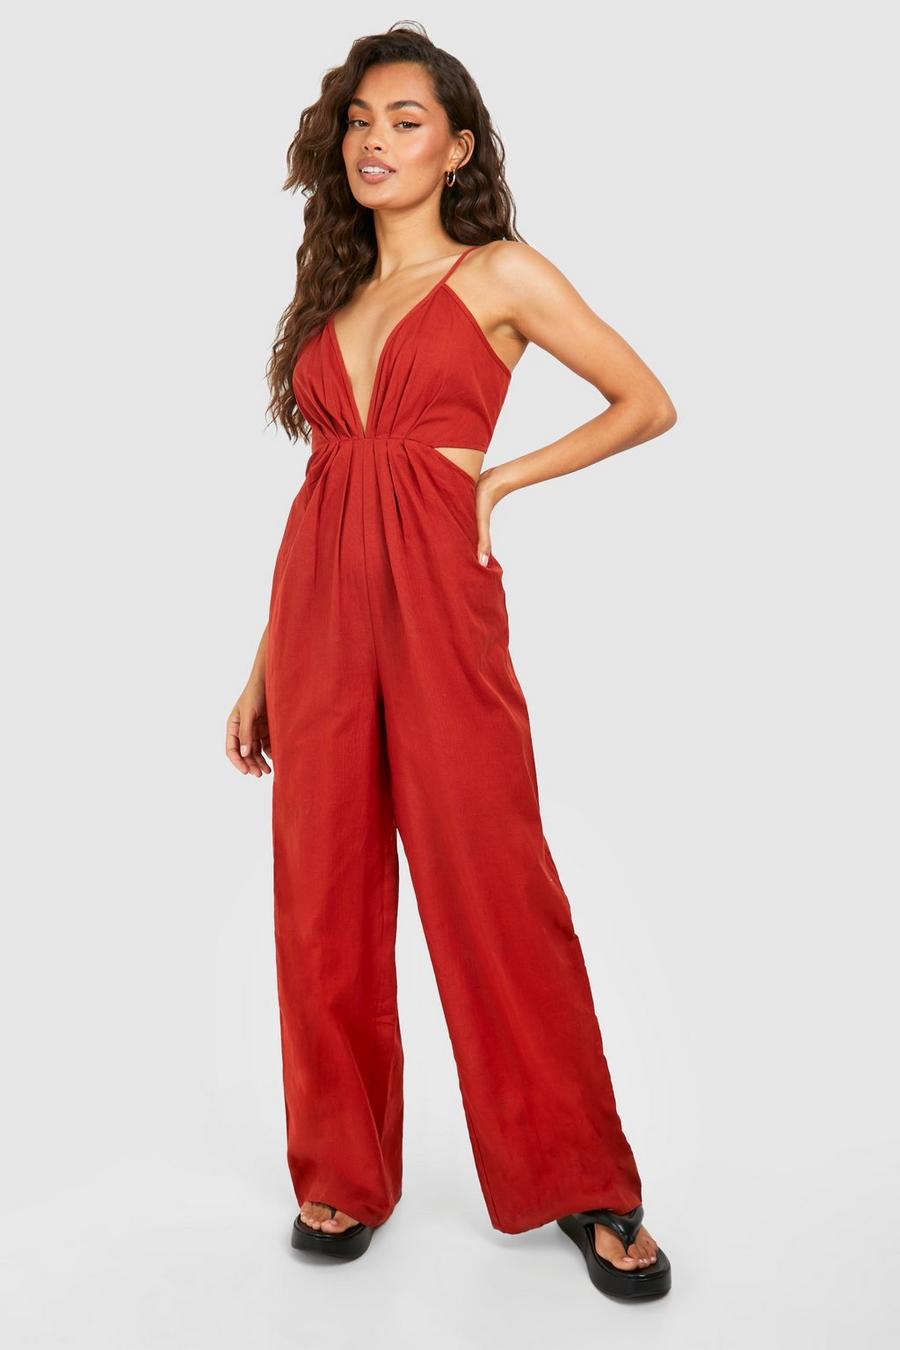 Red Linen Strappy Cut Out Jumpsuit